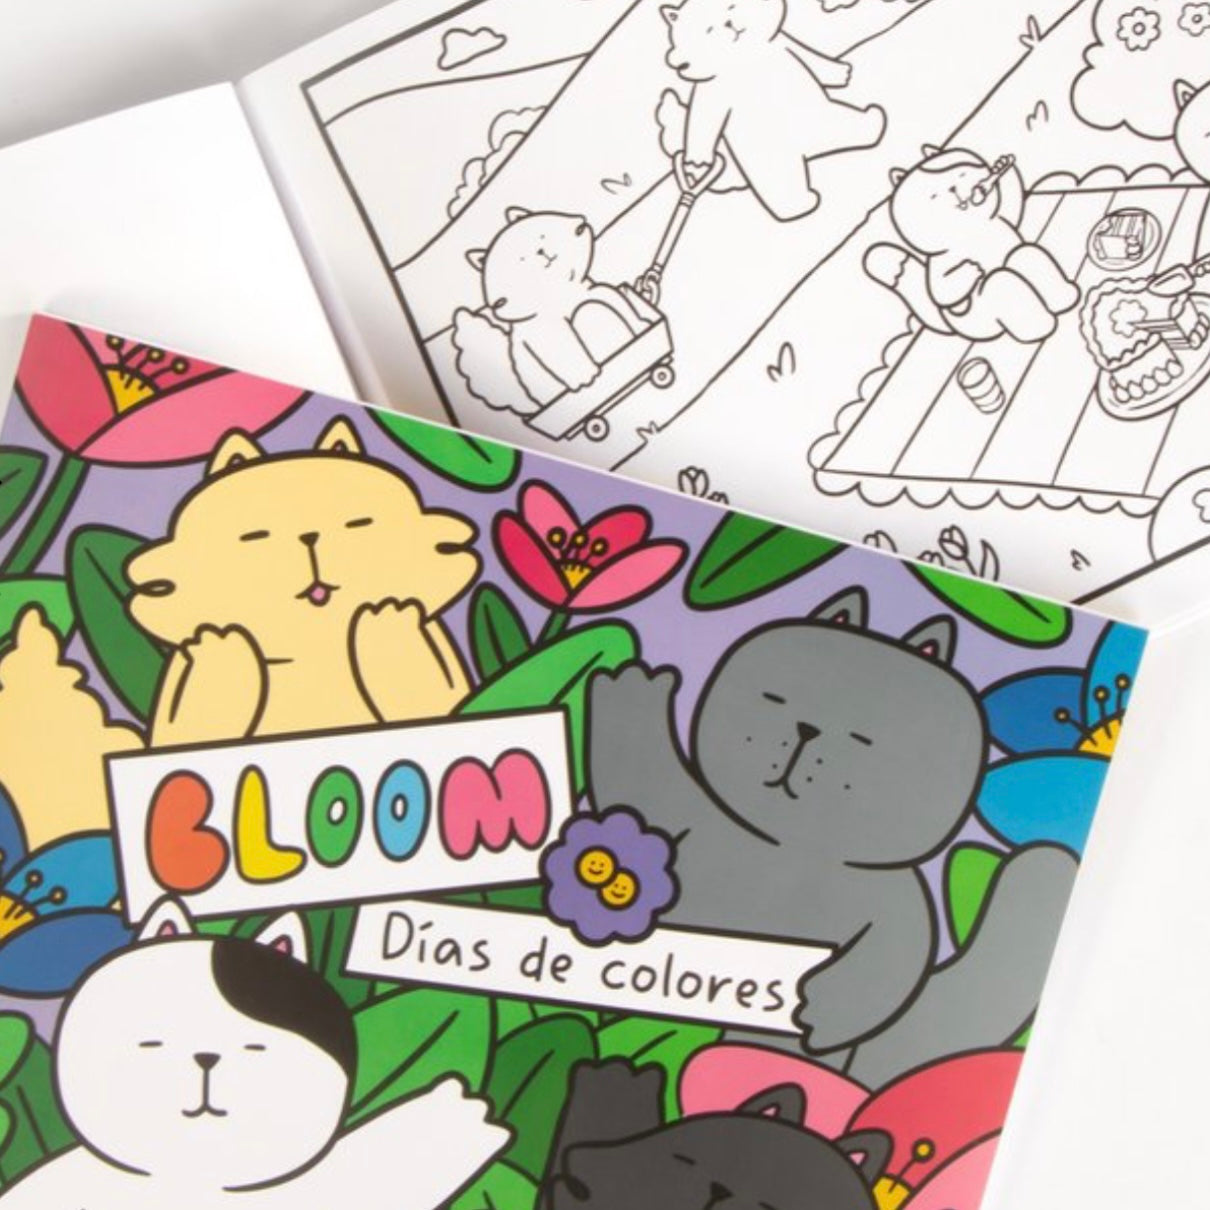 COLORBOOK: DAYS OF COLORS